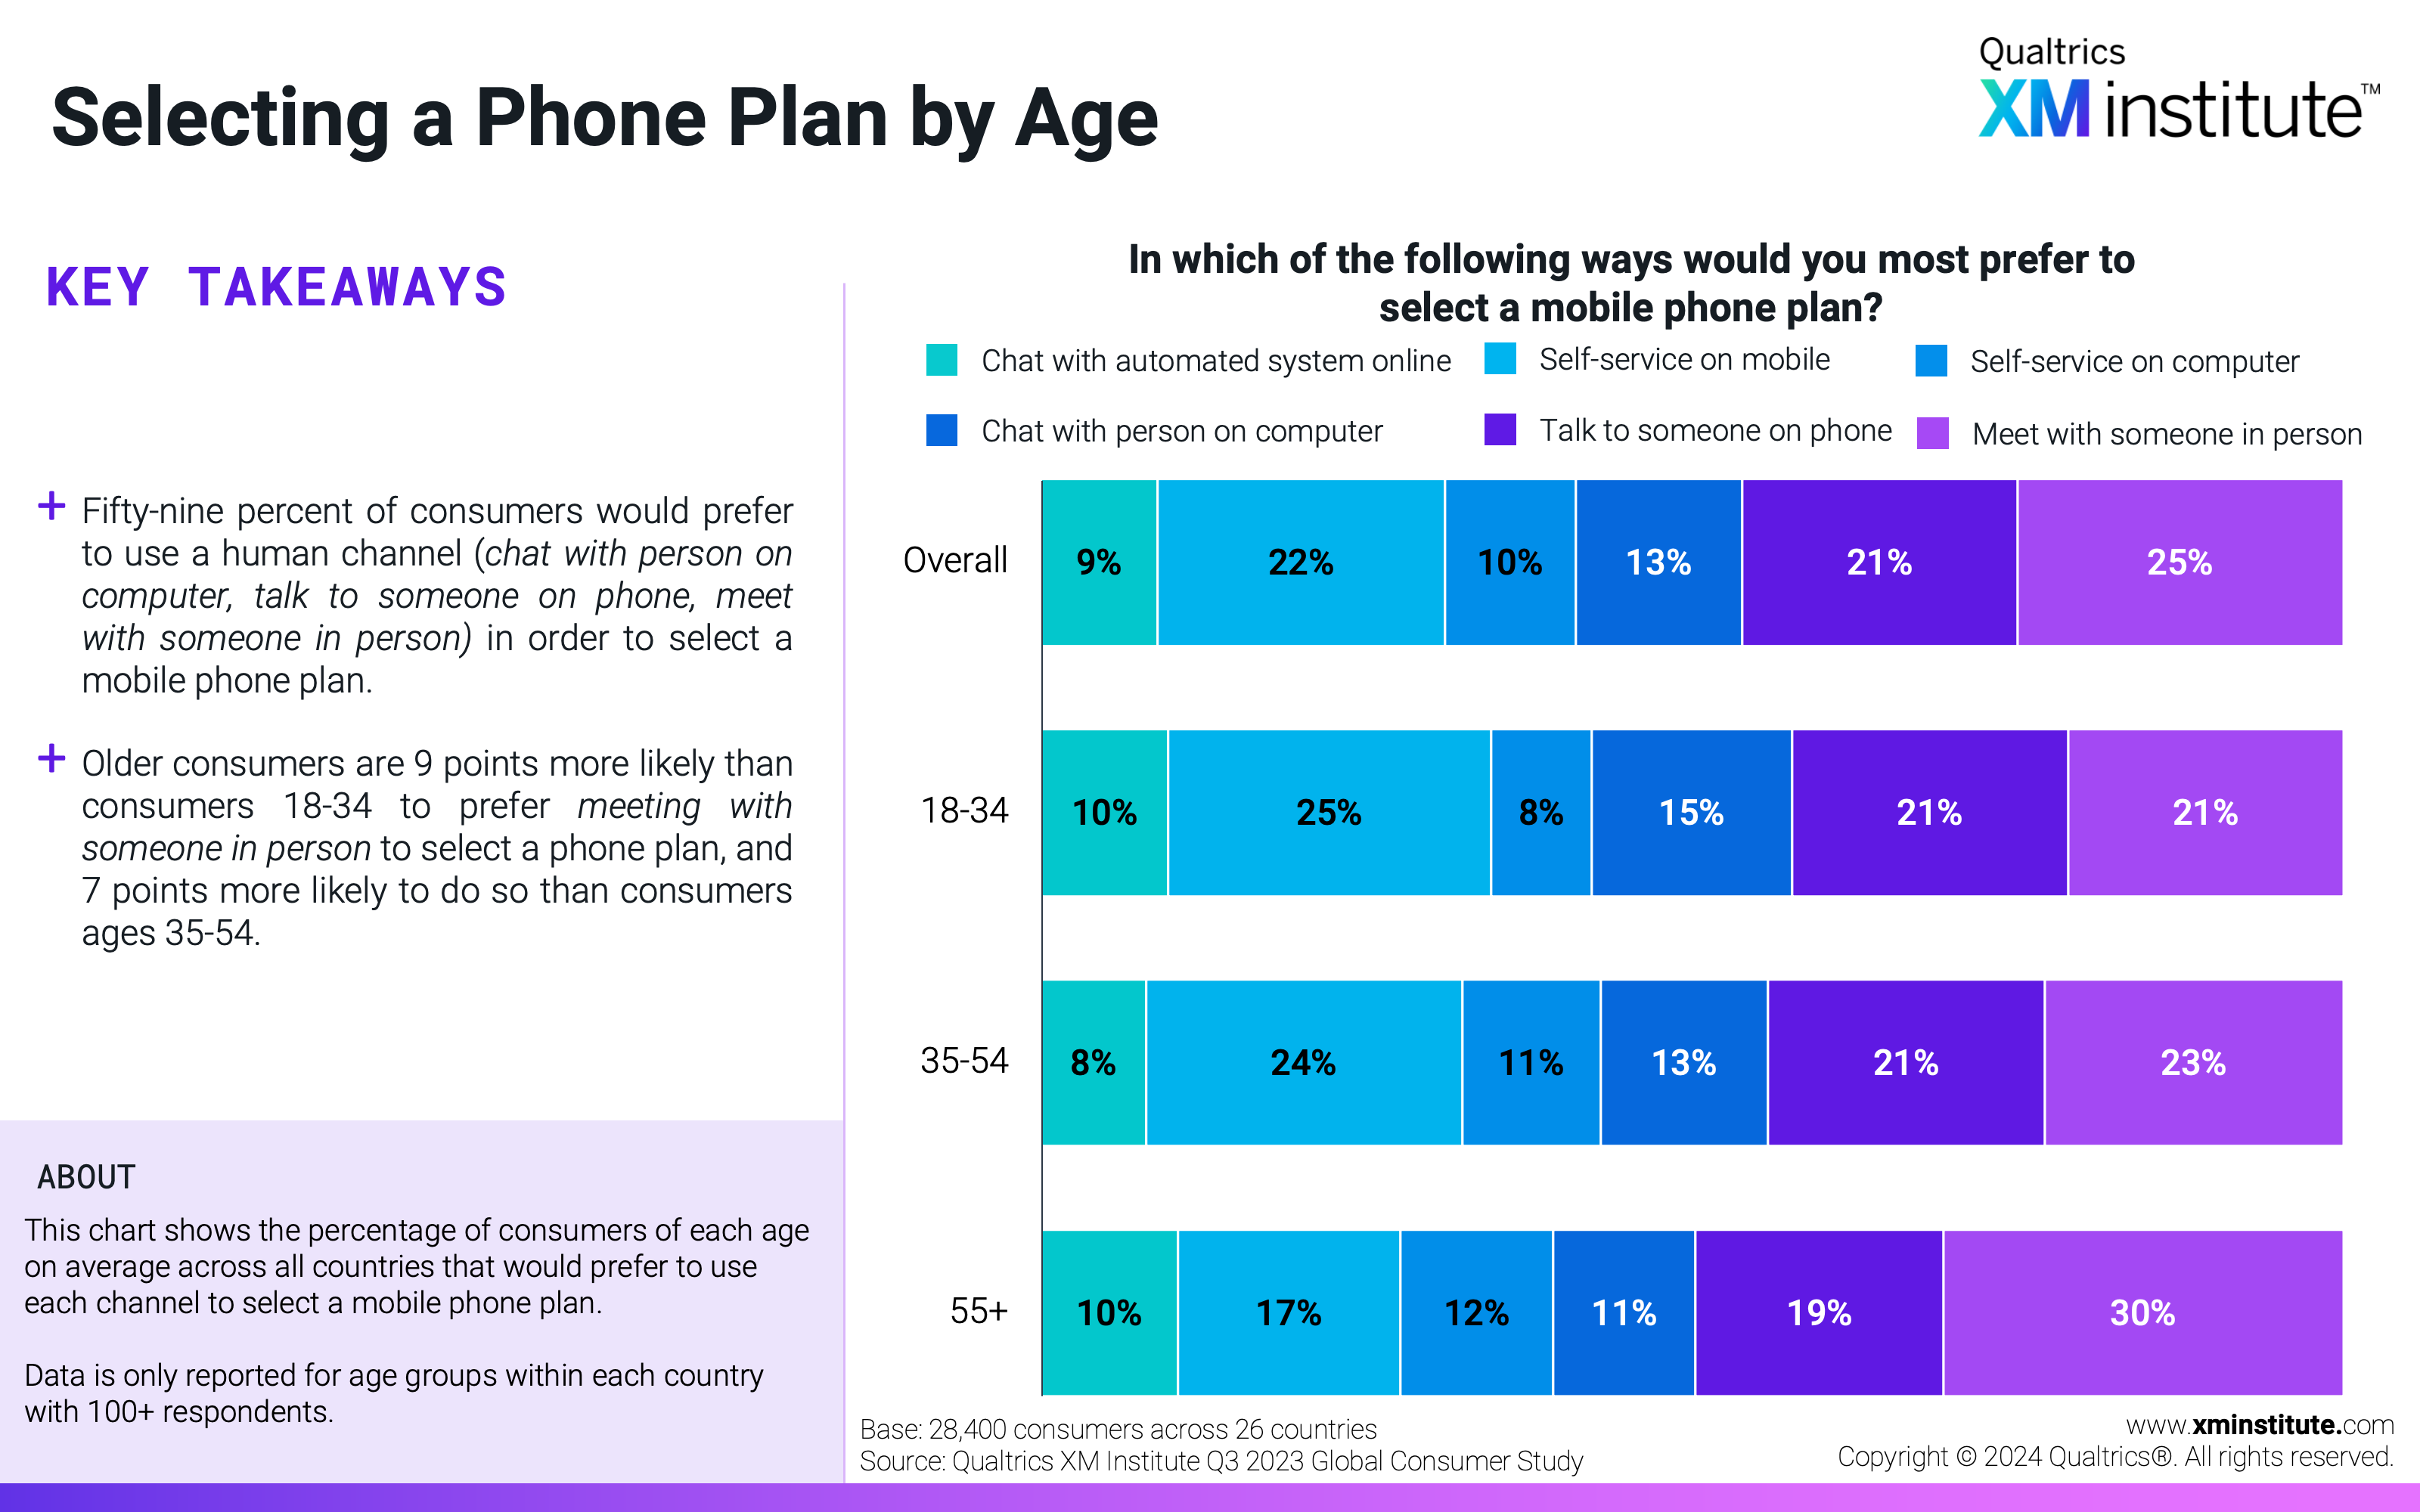 This chart shows the percentage of consumers of each age on average across all countries that would prefer to use each channel to select a mobile phone plan. 